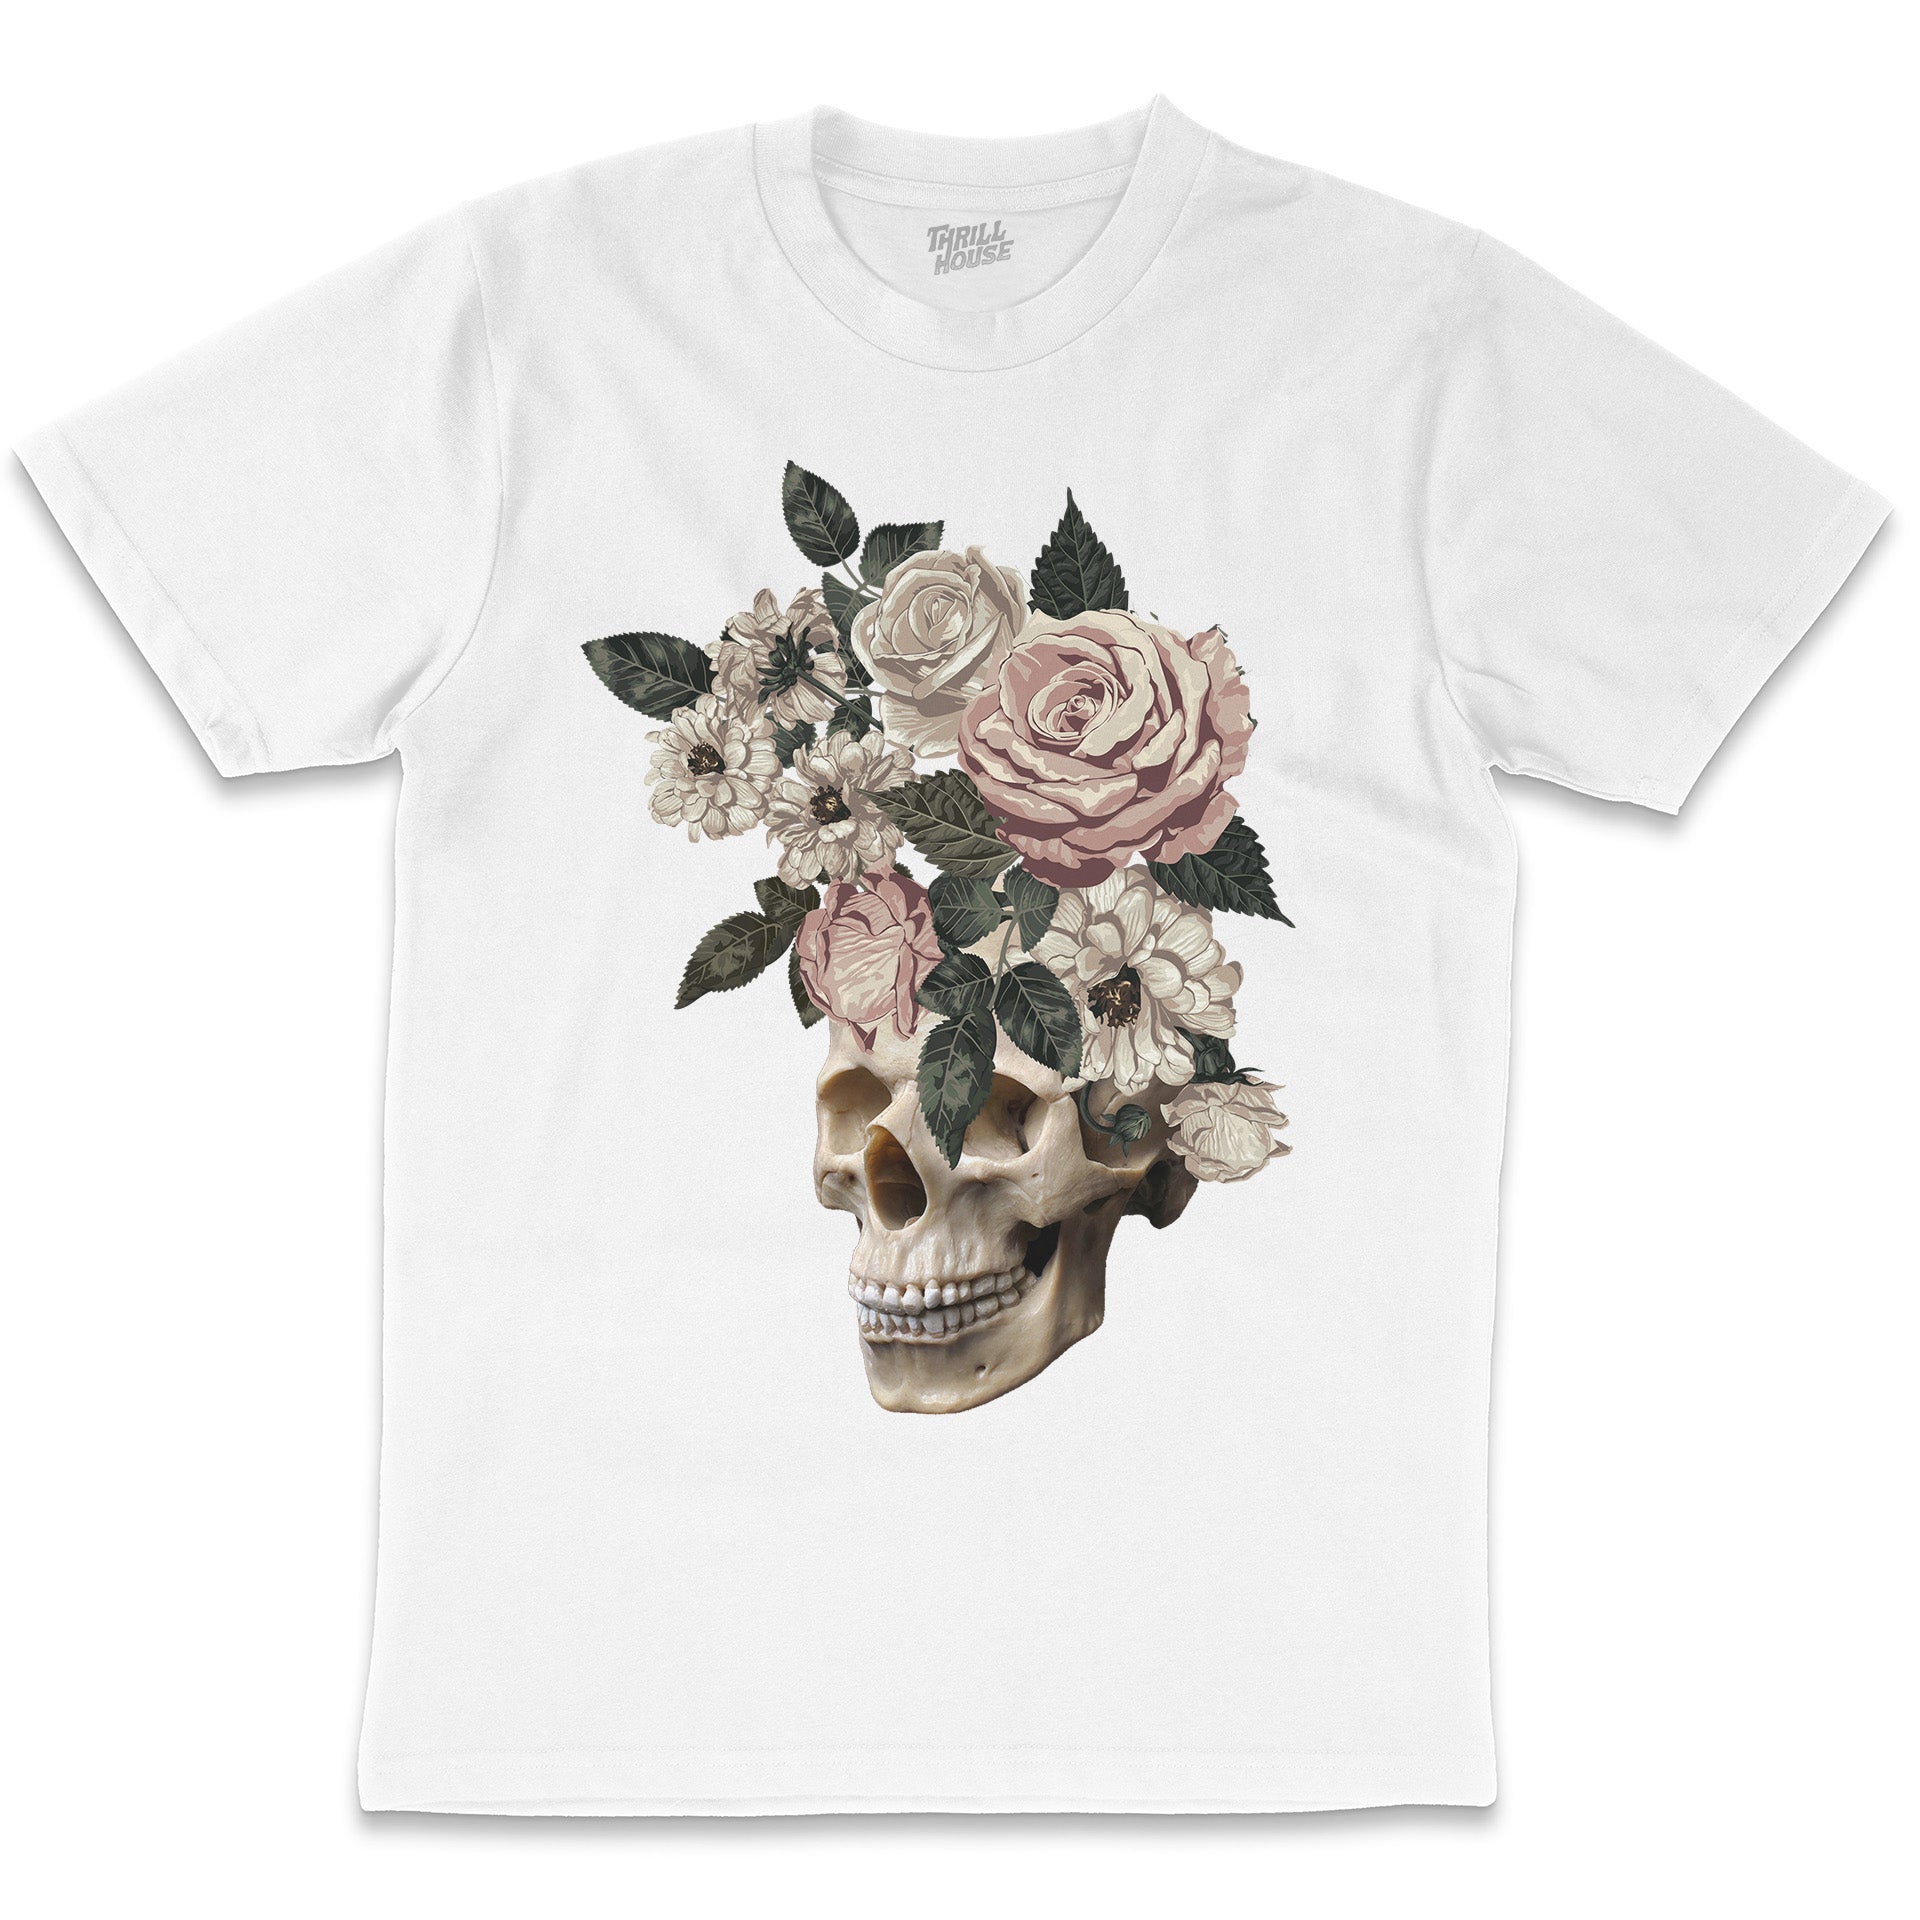 After the Funeral Dark Death Skull Flowers Macabre Tattoo Art Artsy Cool Cotton T-Shirt